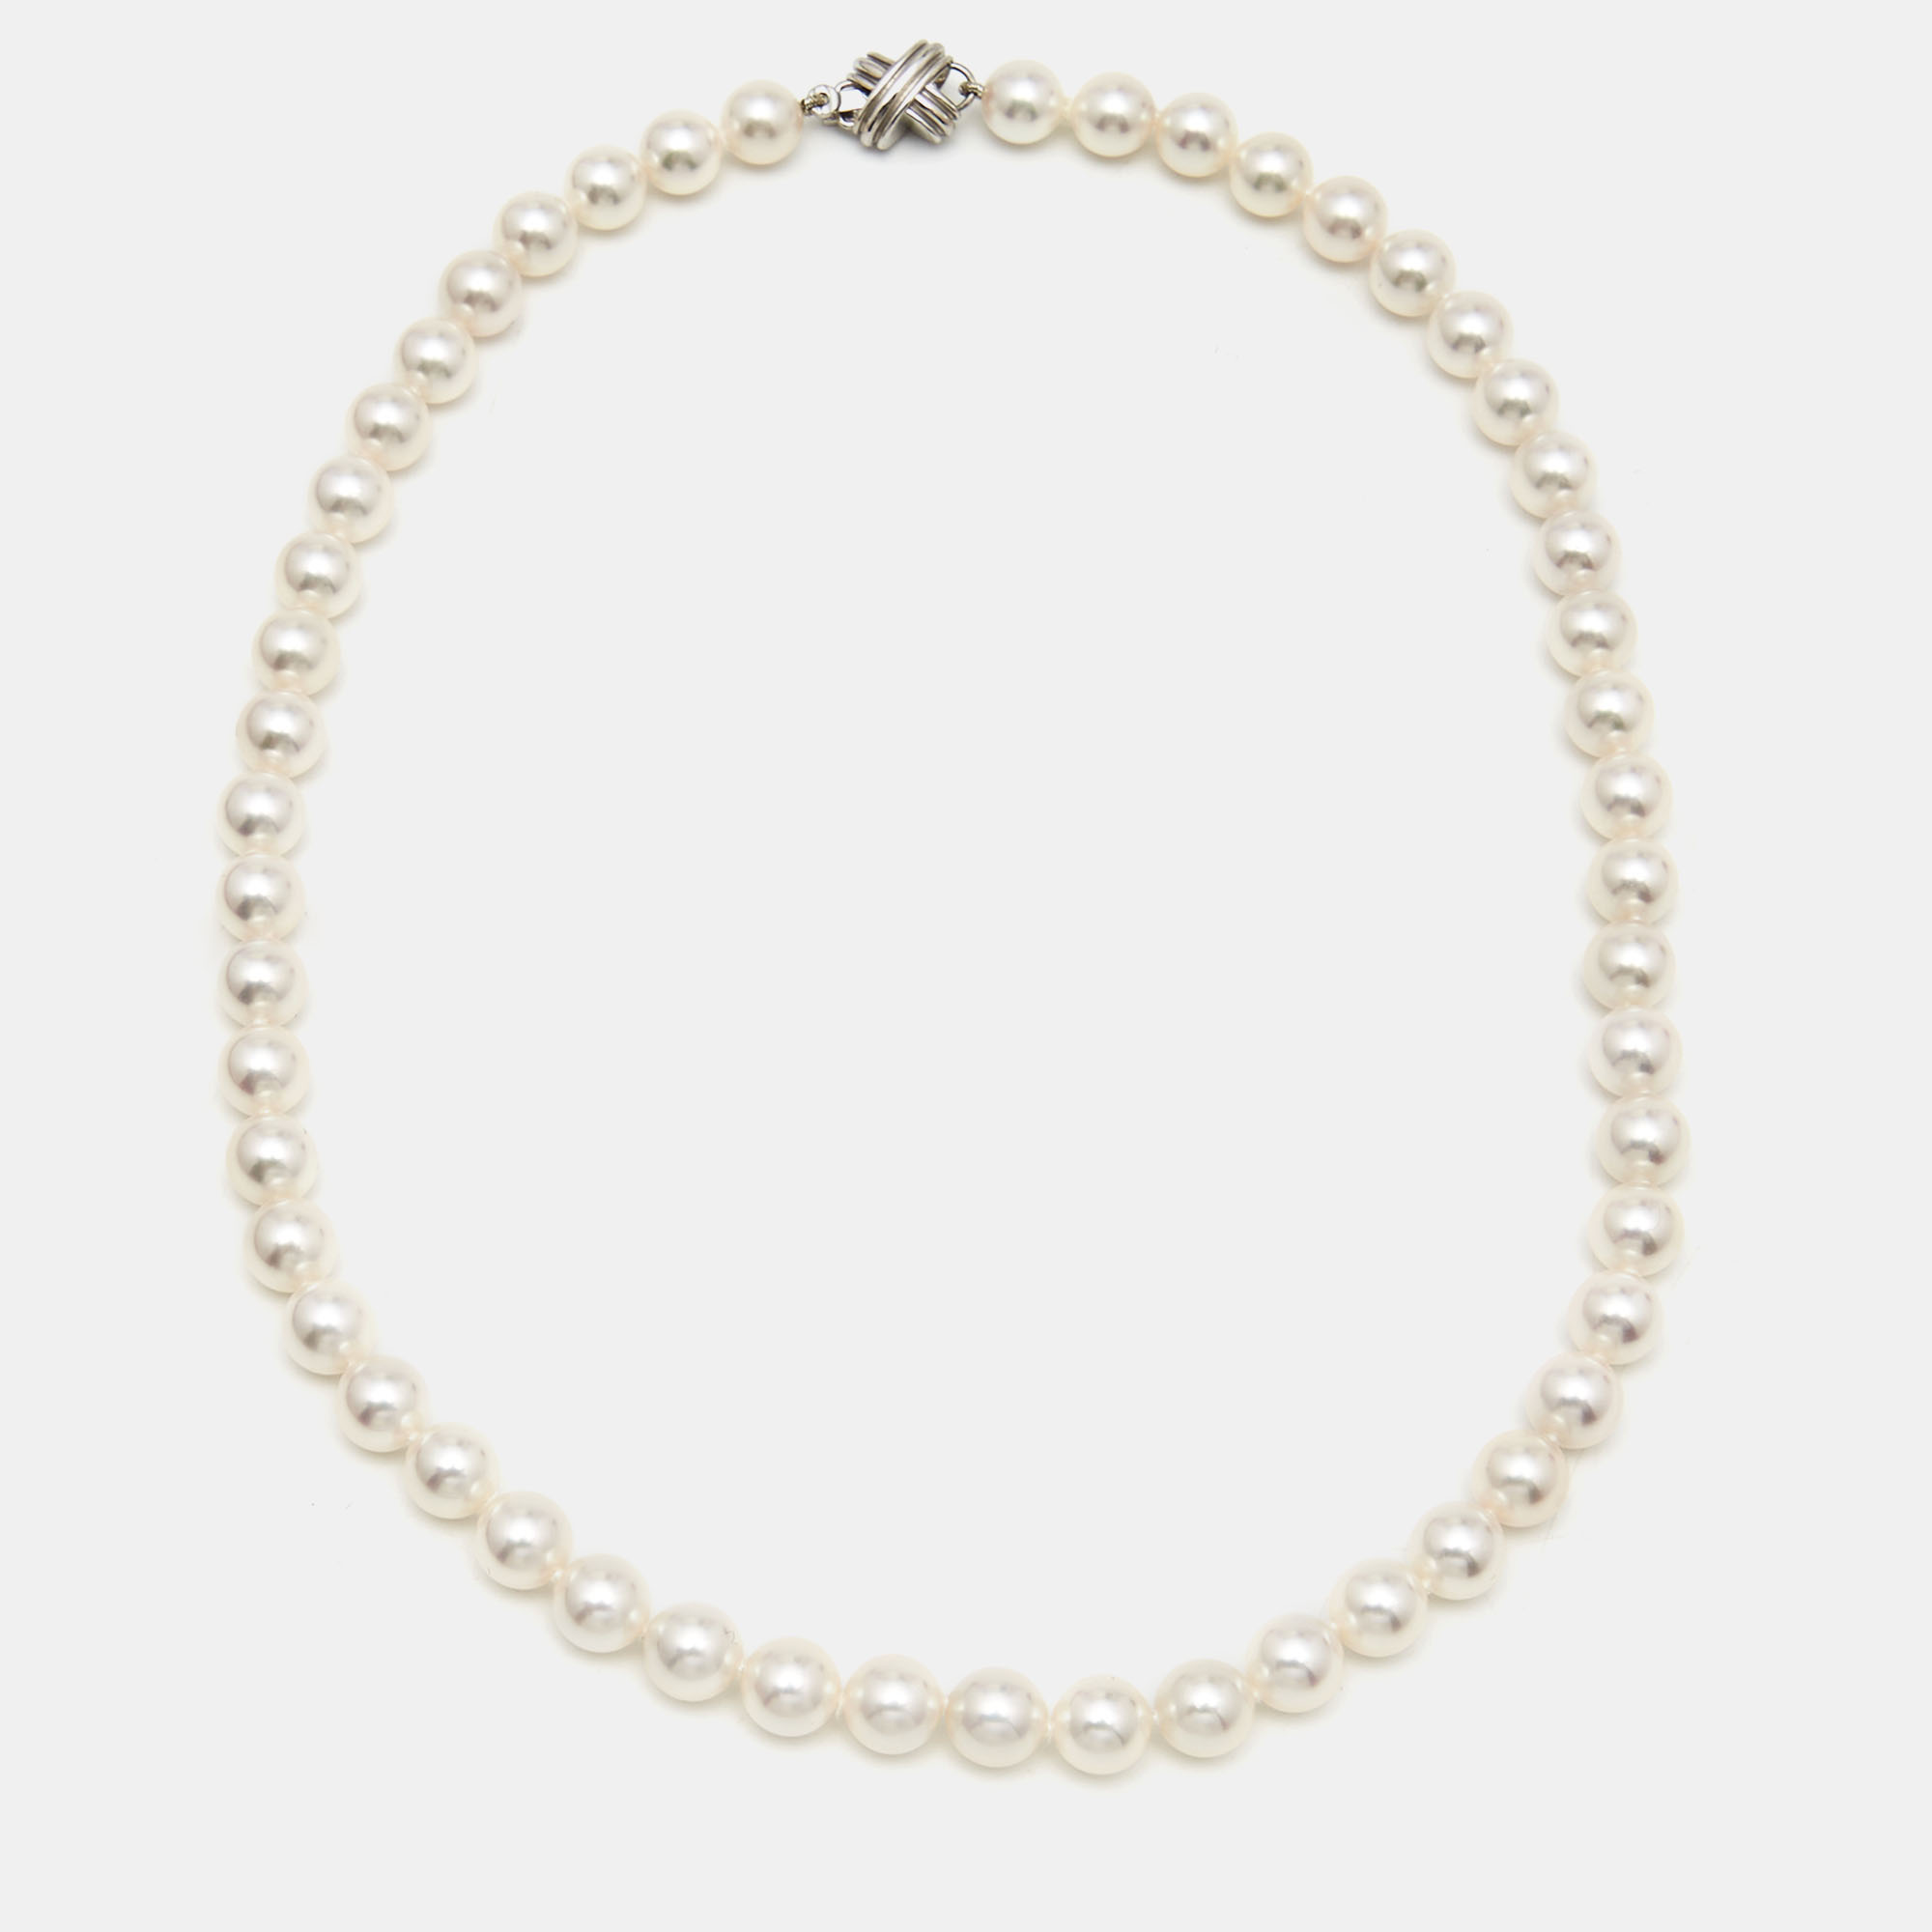 TIFFANY & CO Pre-owned Signature X Cultured Pearl 18k White Gold Necklace